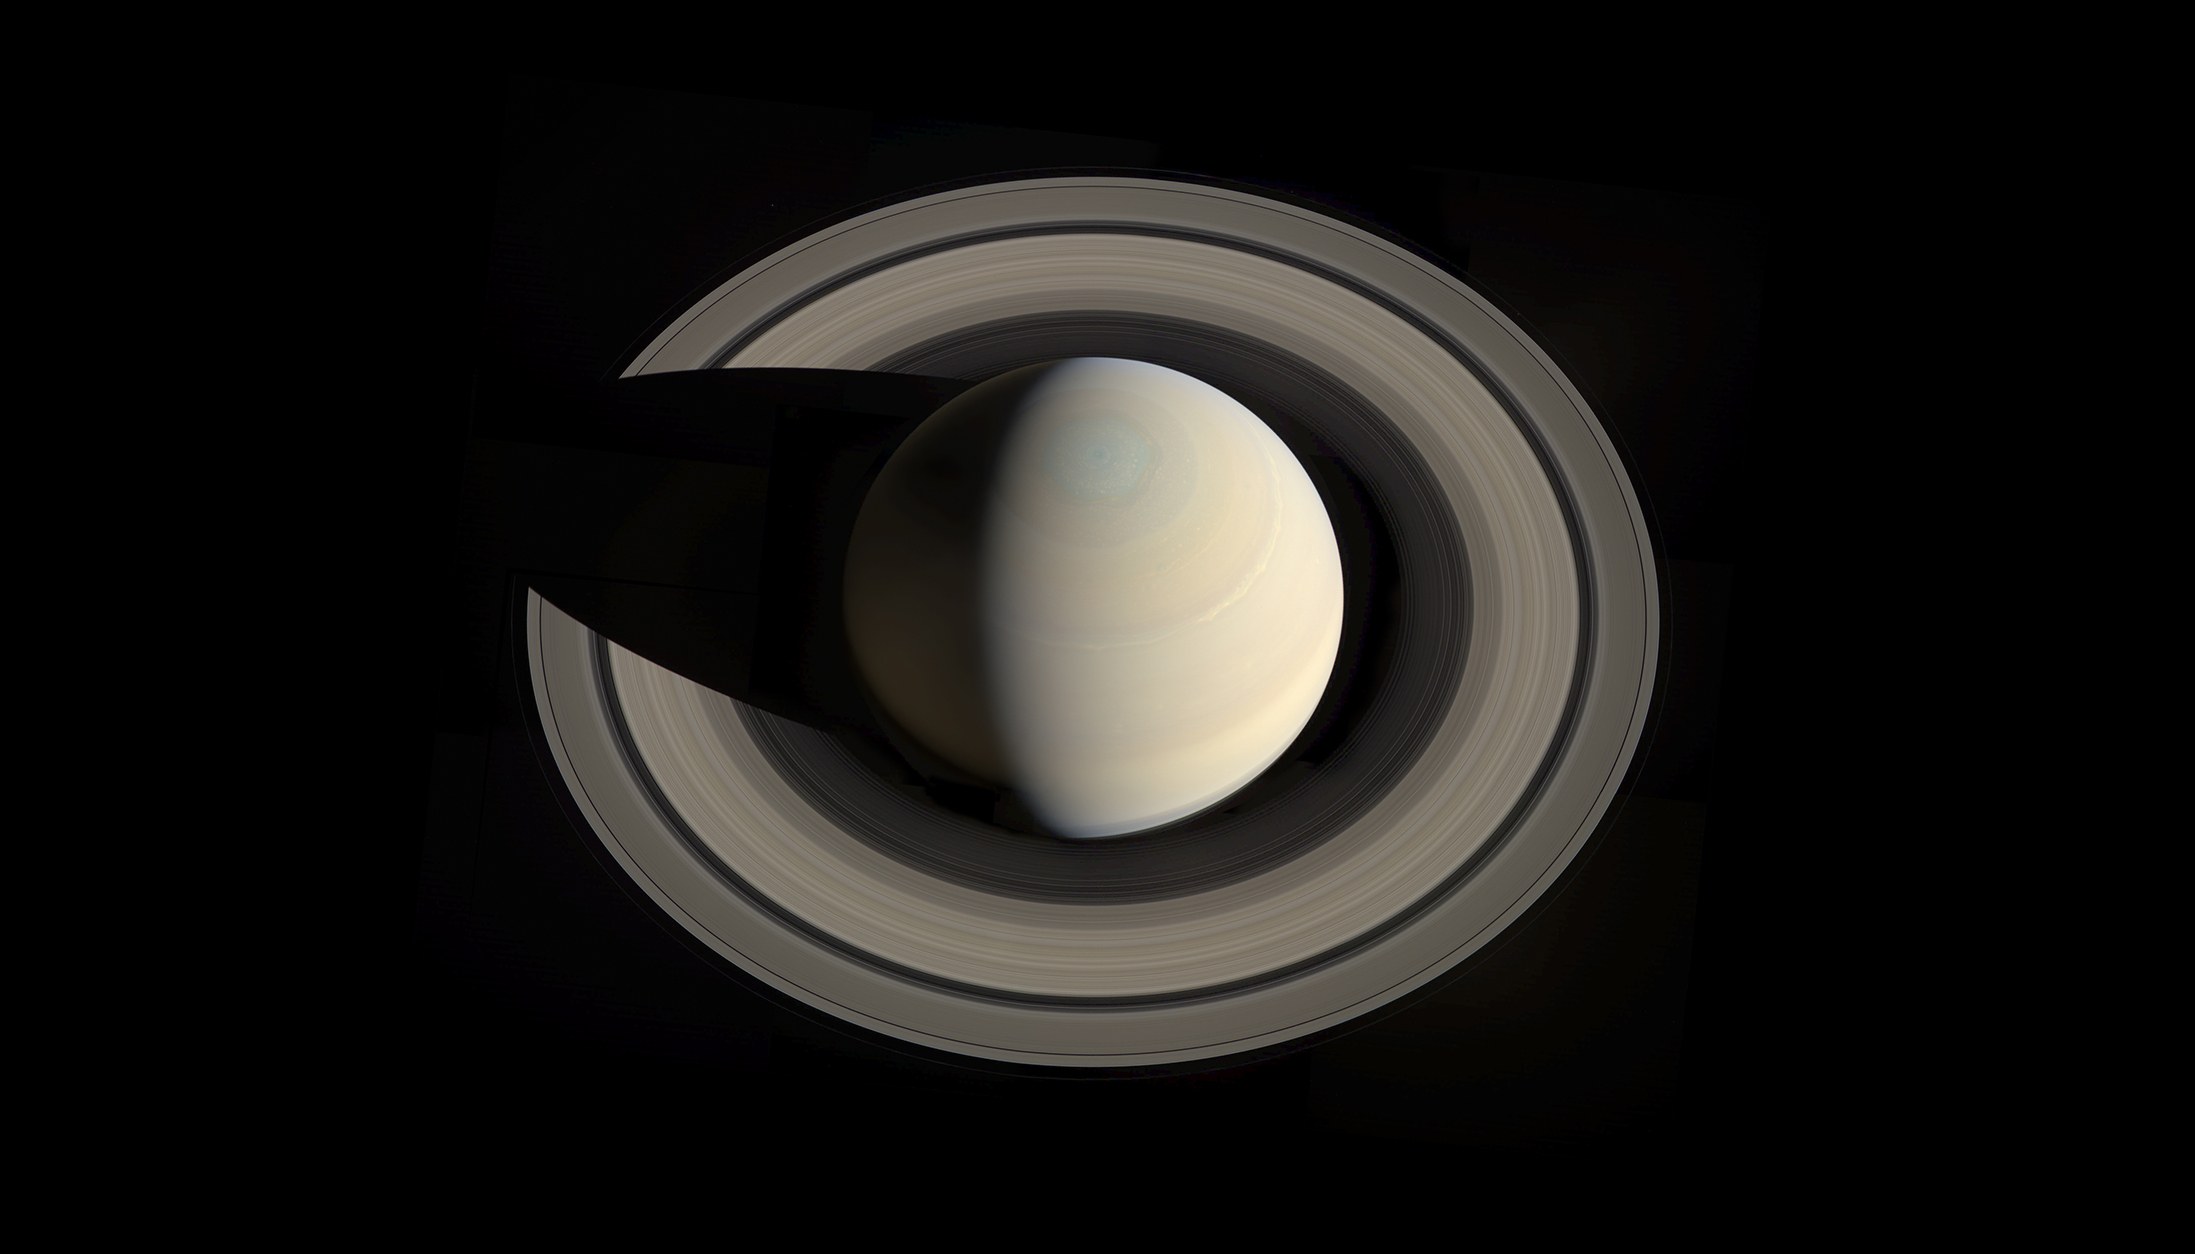 General 2195x1254 space planet Saturn